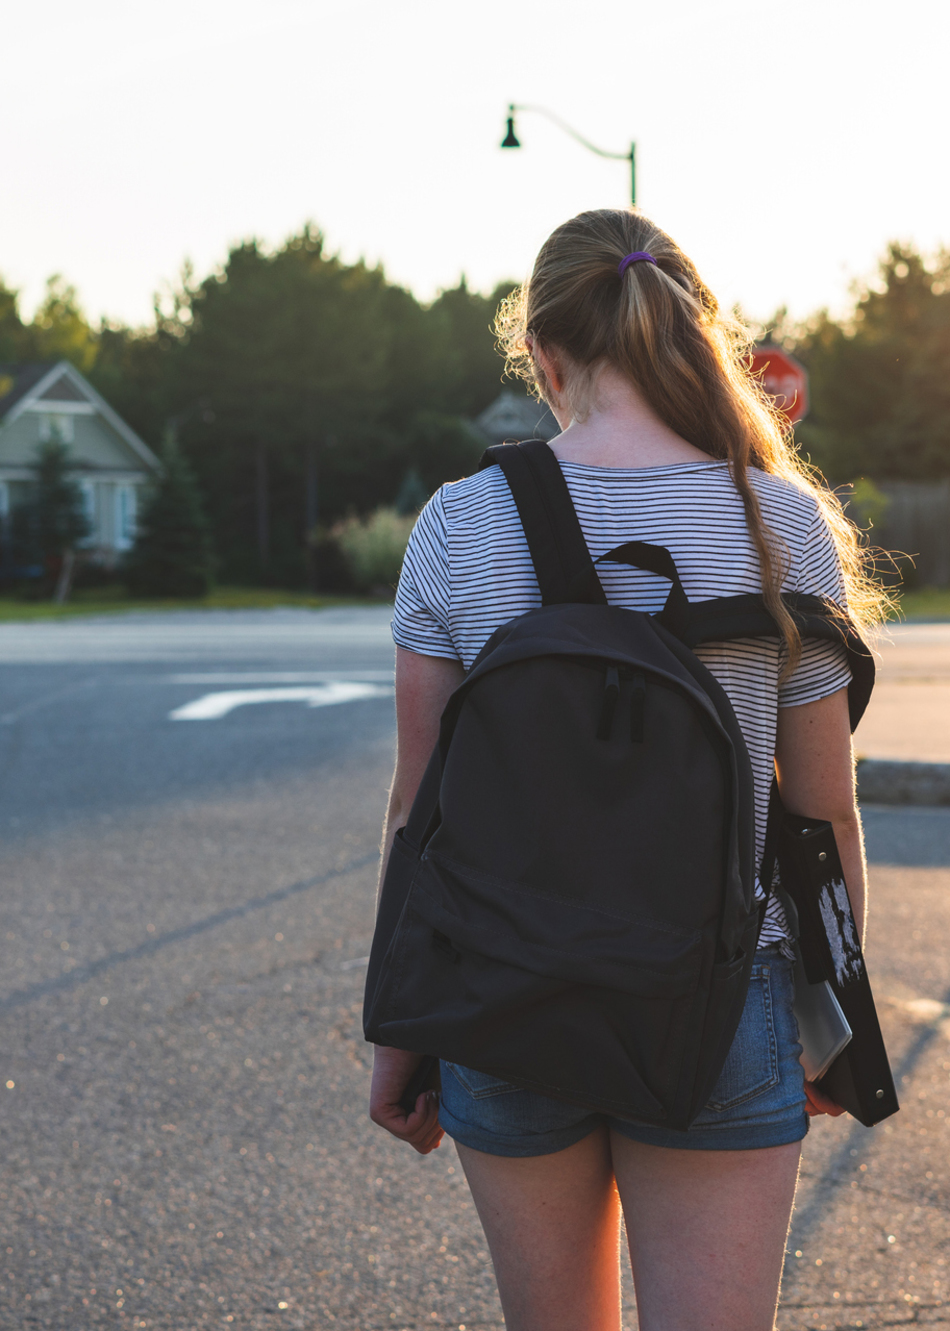 What to Do After Your Teen Runs Away